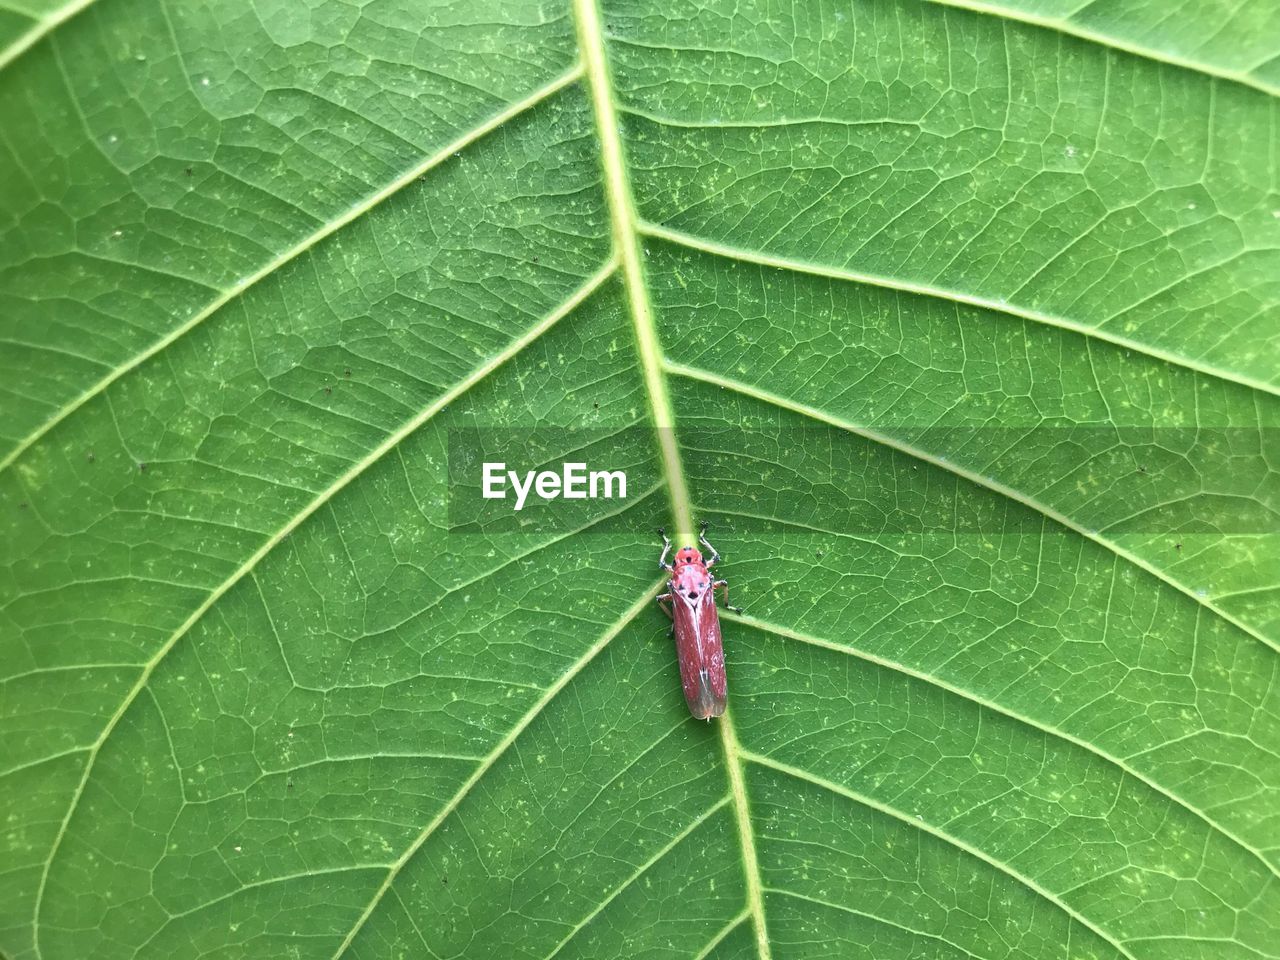 HIGH ANGLE VIEW OF INSECT ON PLANT LEAVES